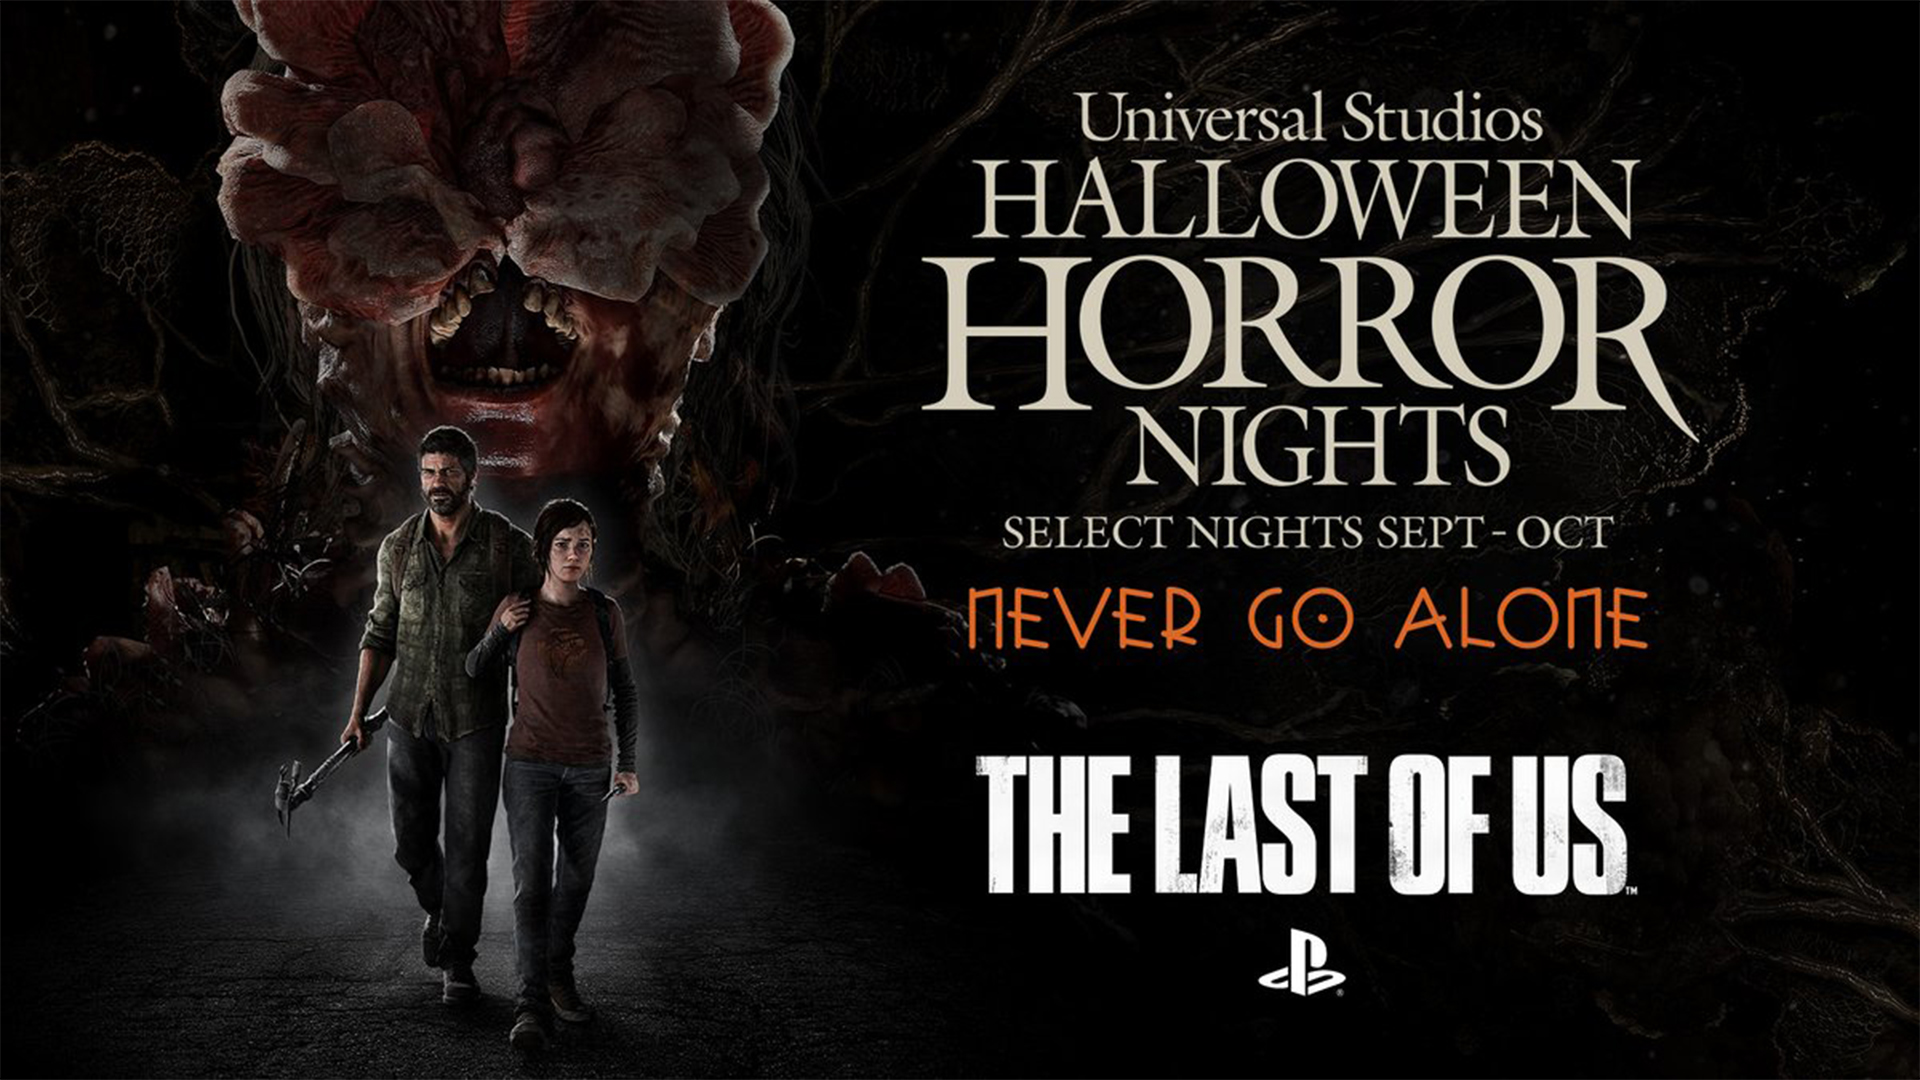 Experience the Horrifying World of The Last of Us at Universal Studios